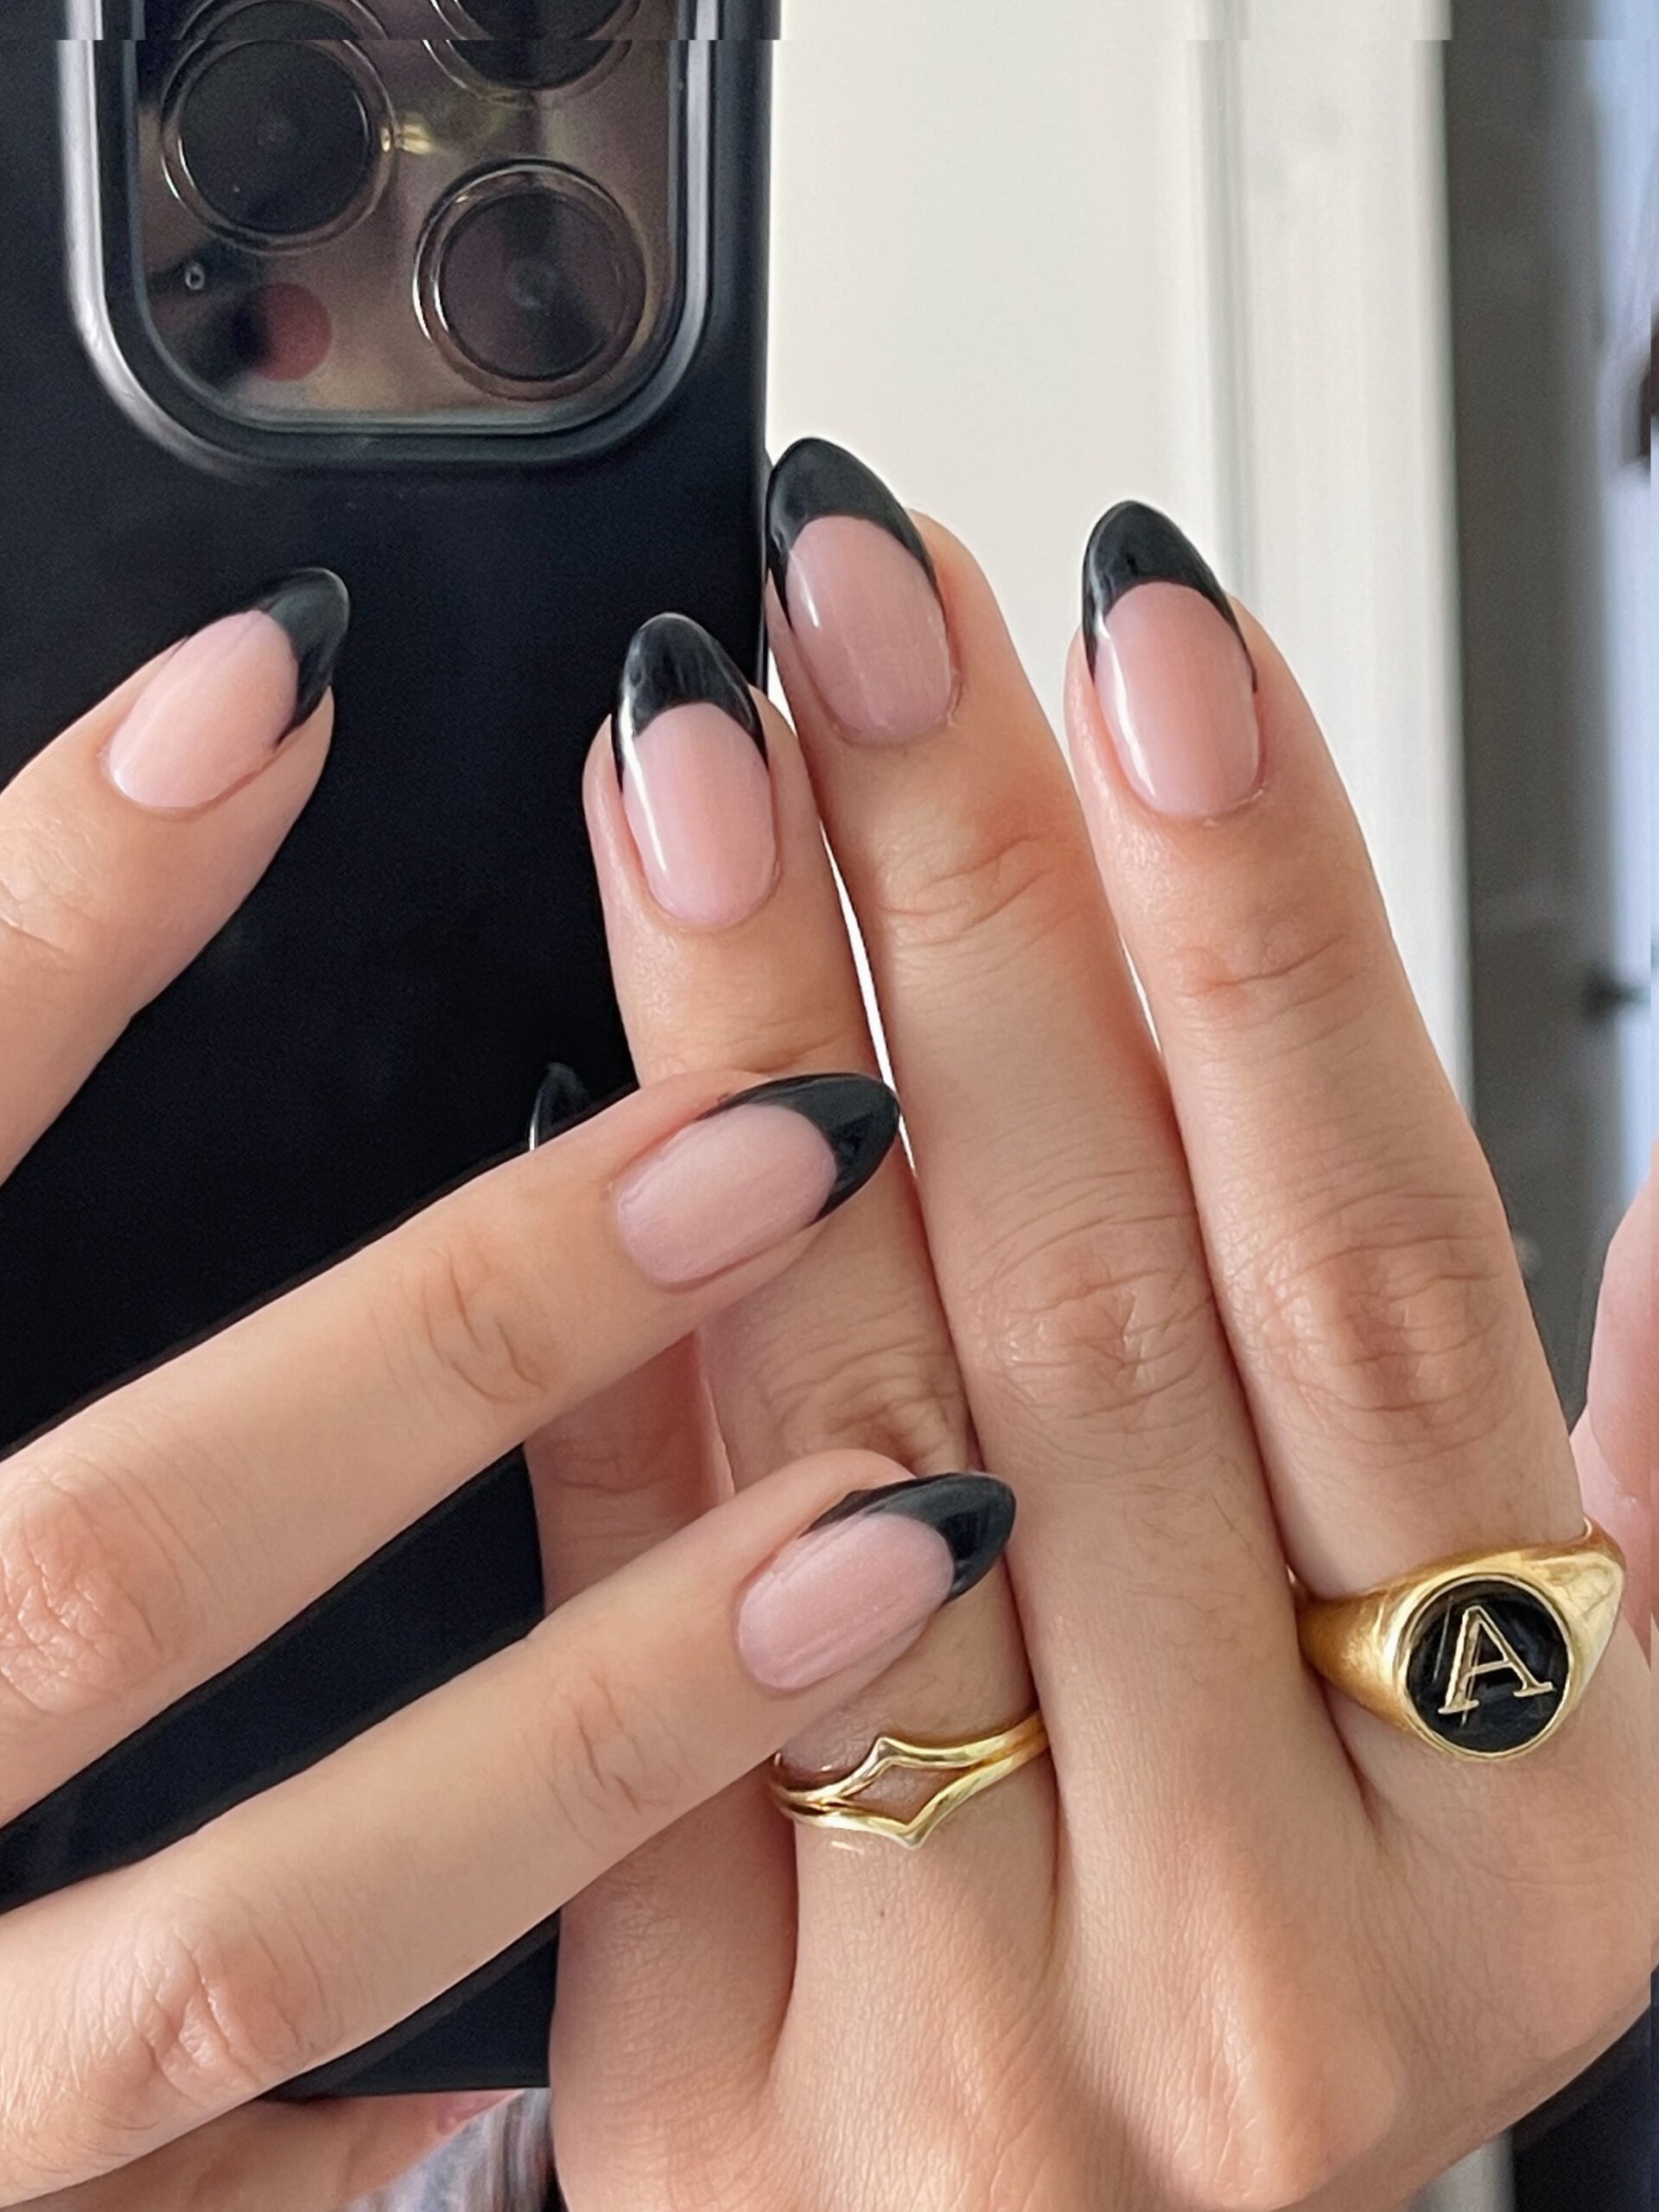 How to Rock Almond Acrylic Nails Like a
Pro